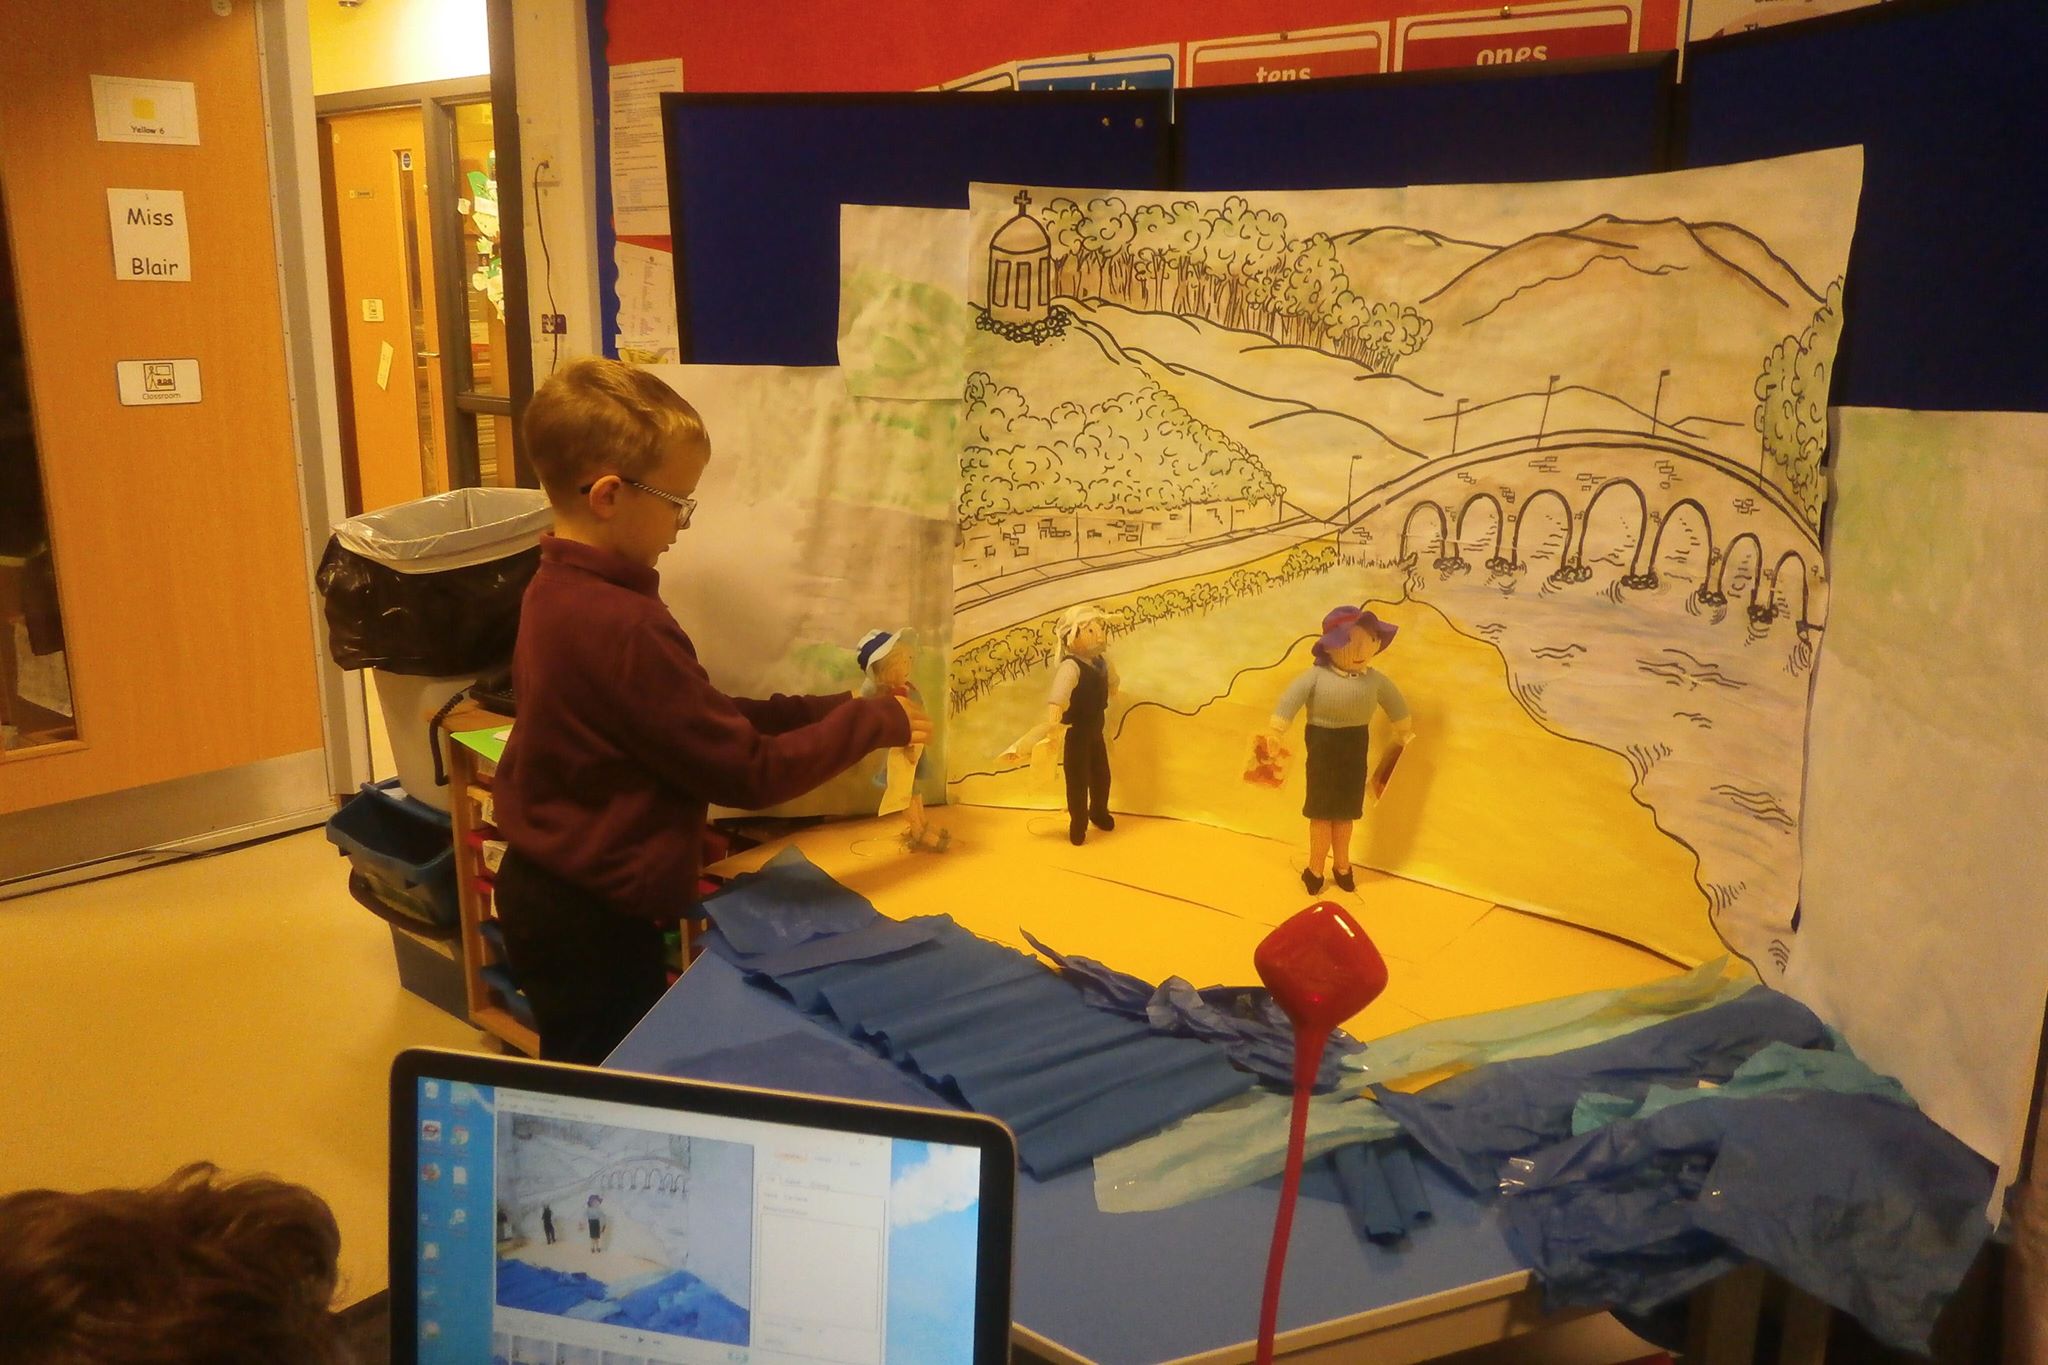 Banff and Macduff Primary School pupils created the video using knitted Broons characters